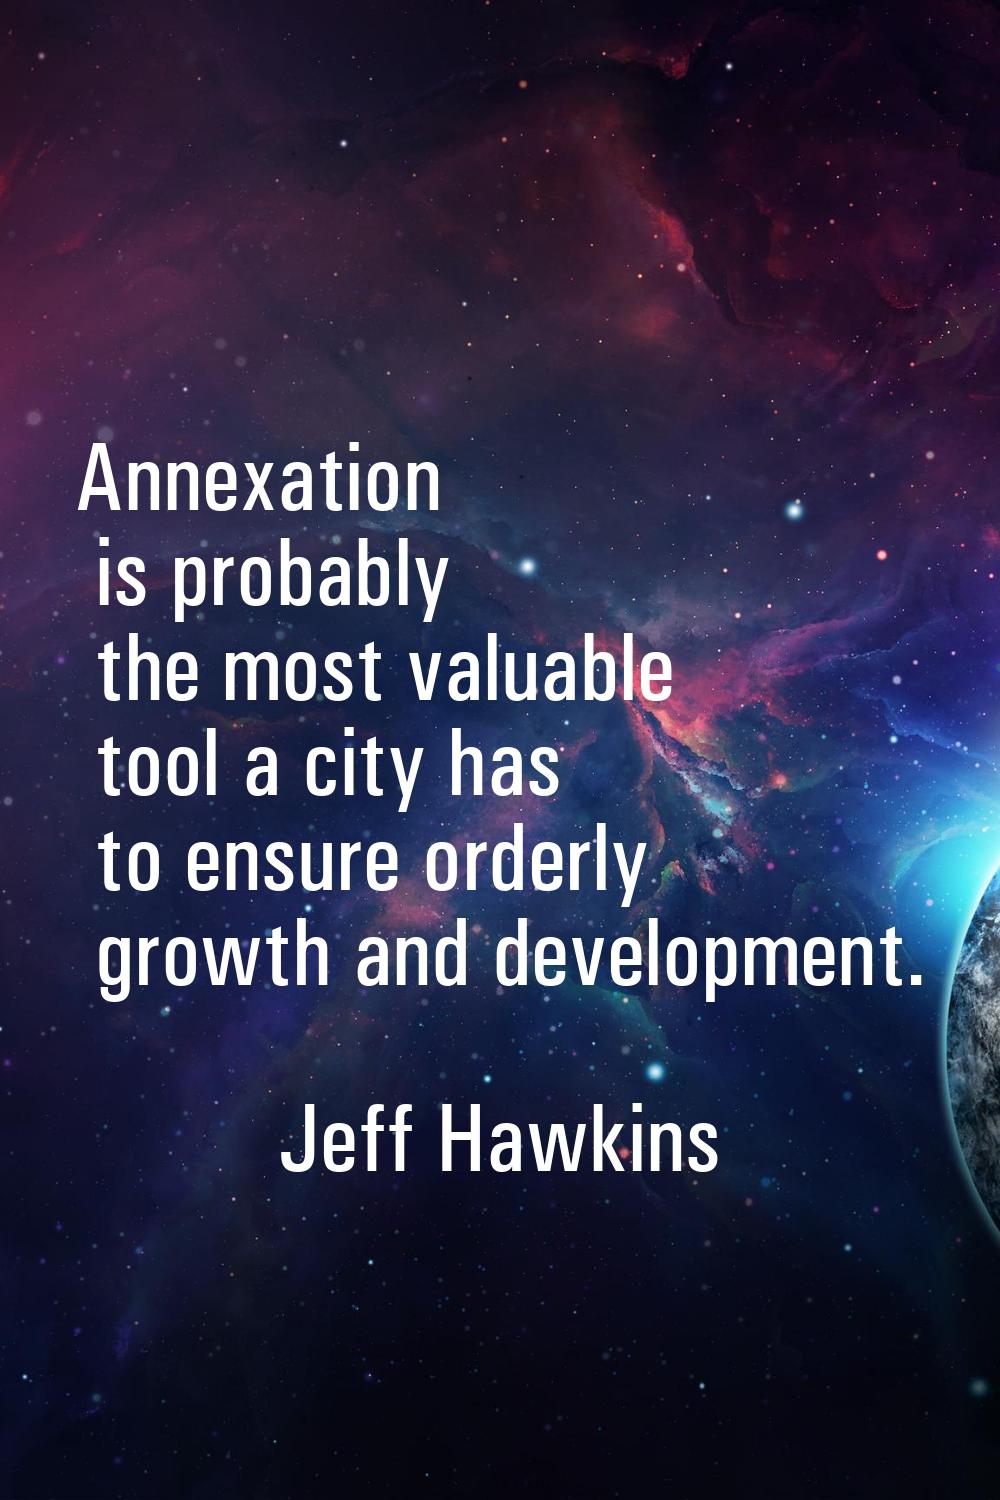 Annexation is probably the most valuable tool a city has to ensure orderly growth and development.